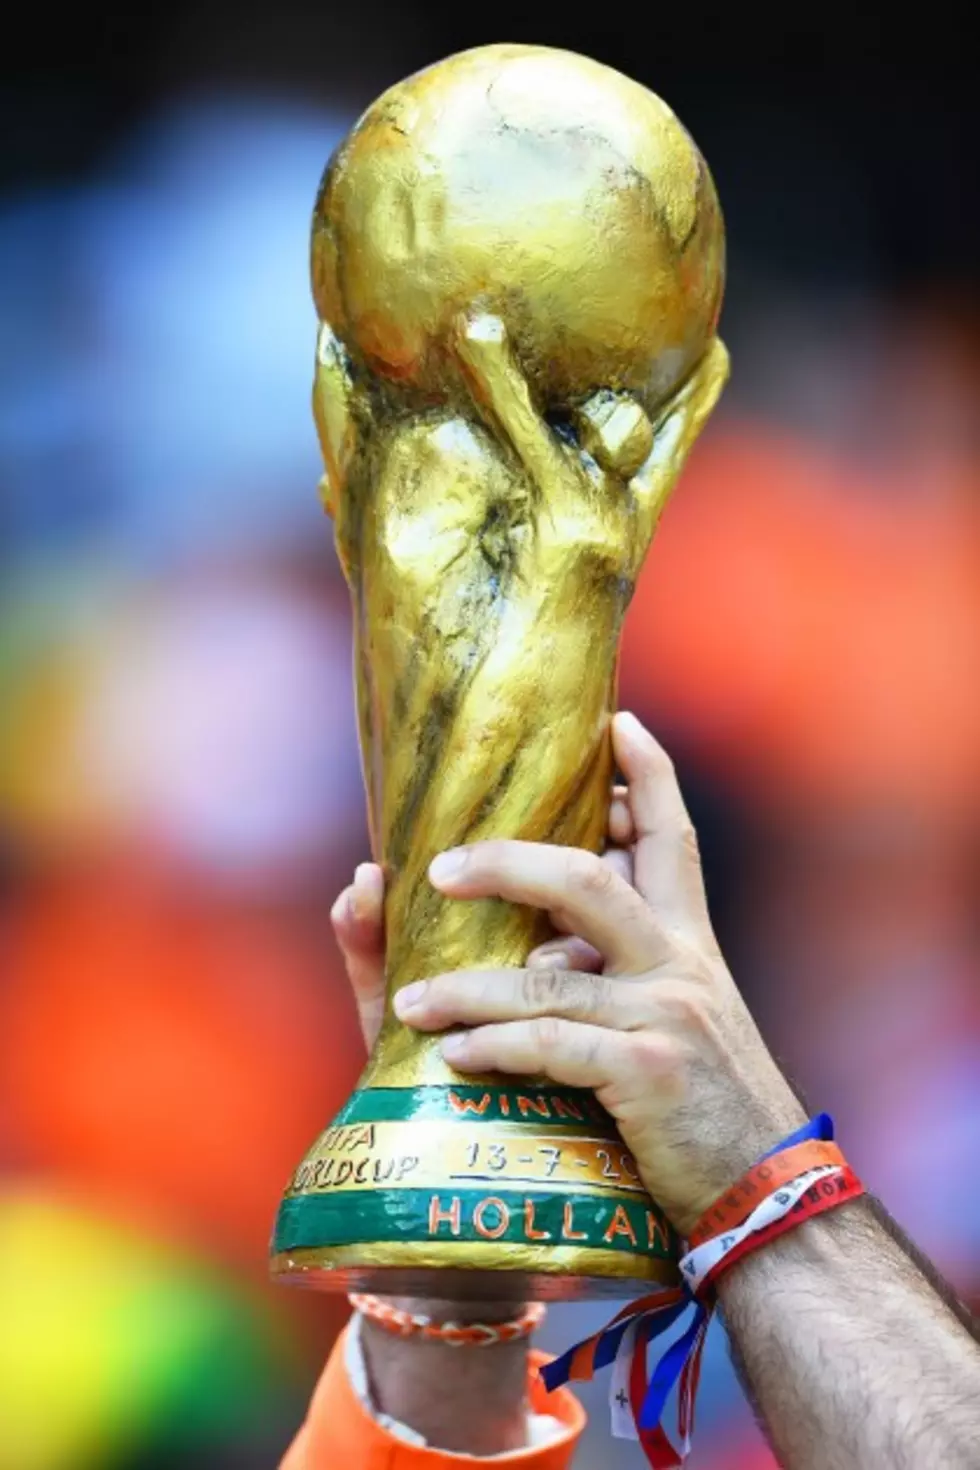 Was The World Cup Trophy Stolen? Learn The Scandalous History Behind The World Cup Trophies